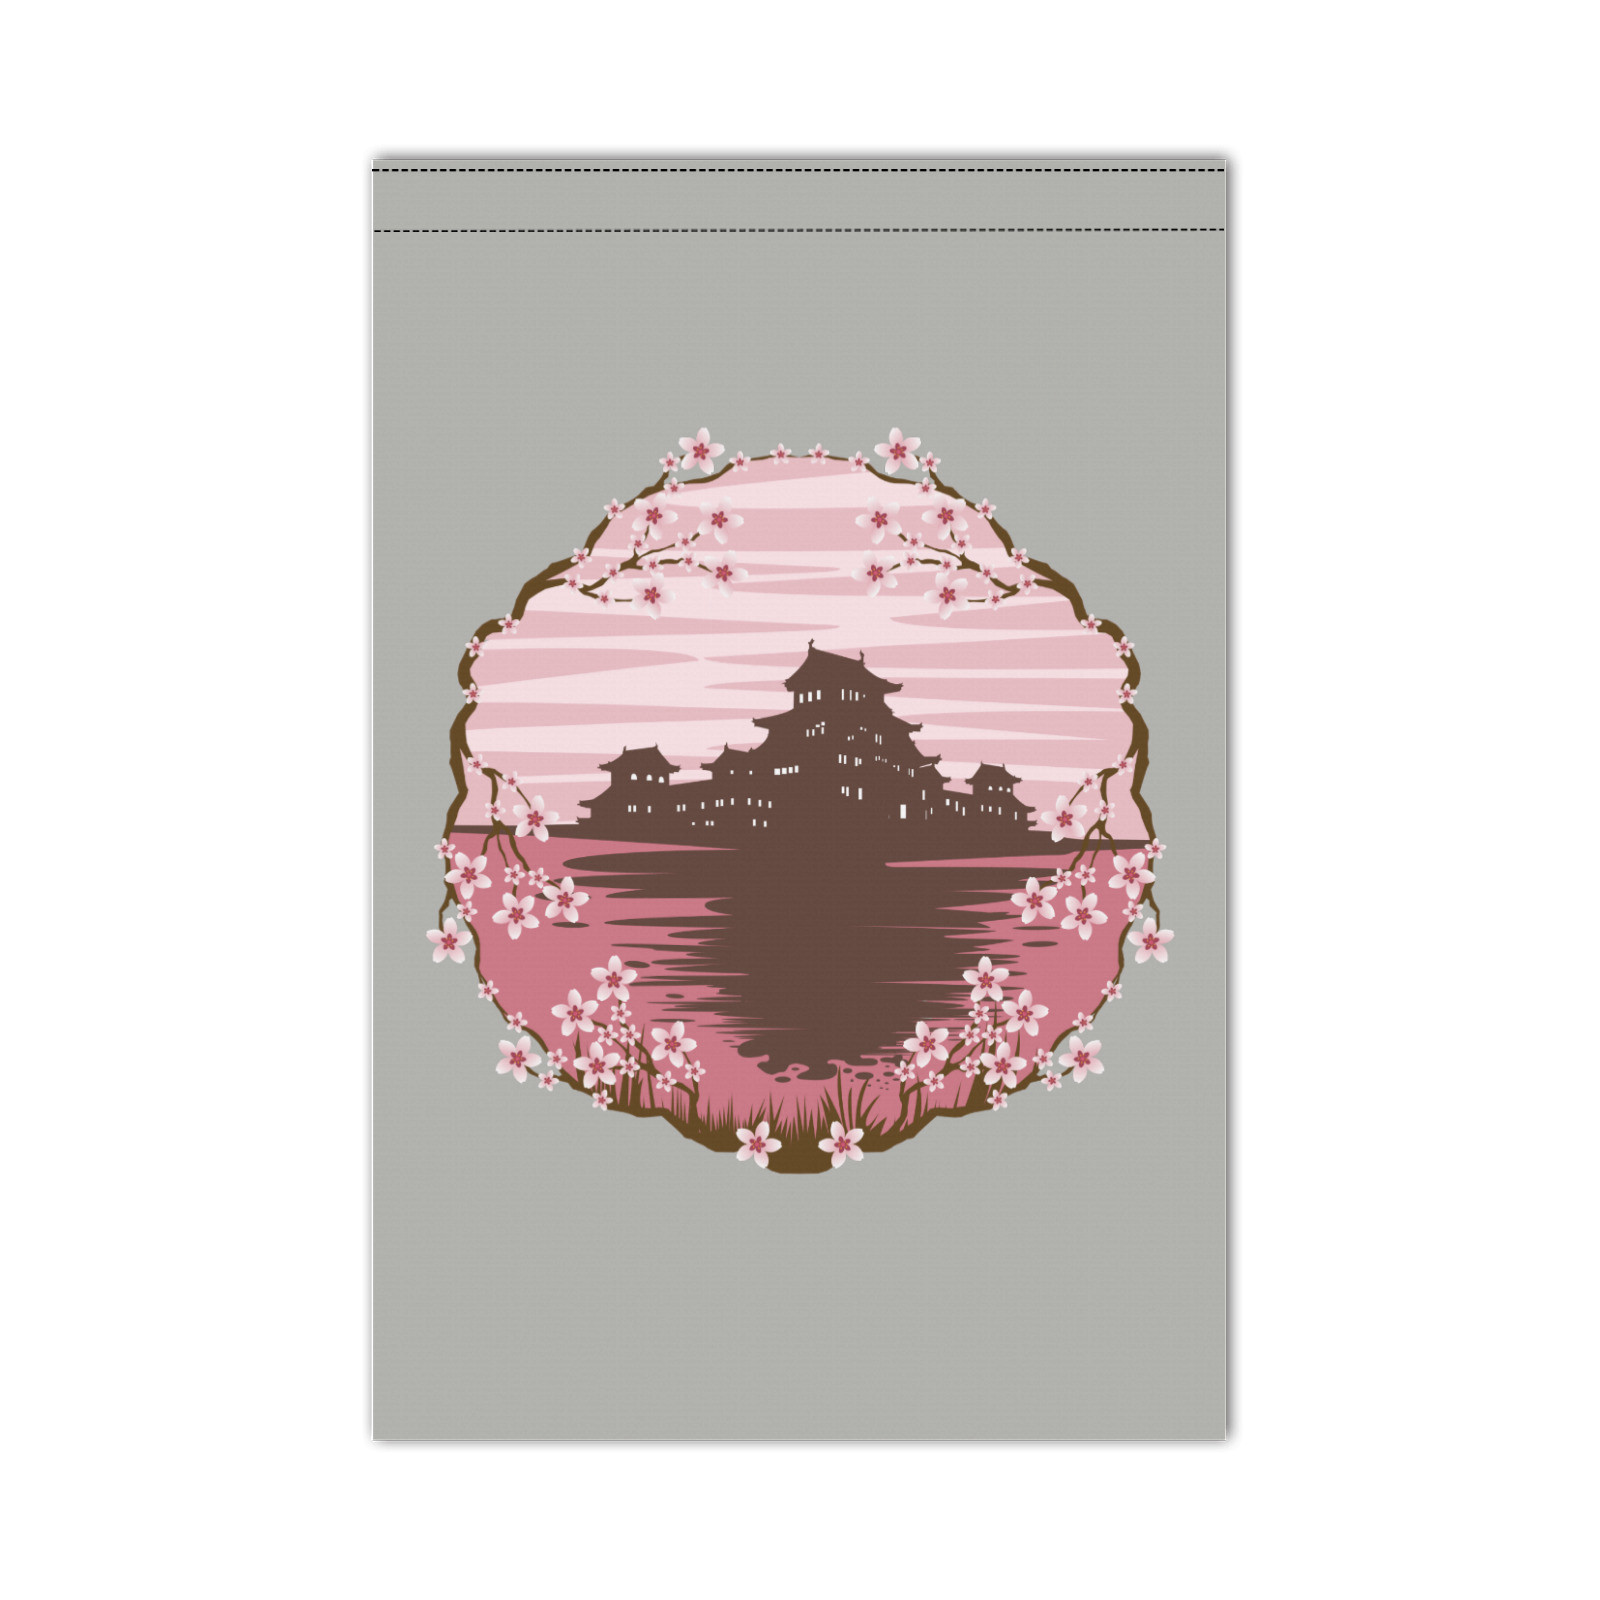 Pink Blossom Garden Flag 12‘’x18‘’(Twin Sides)